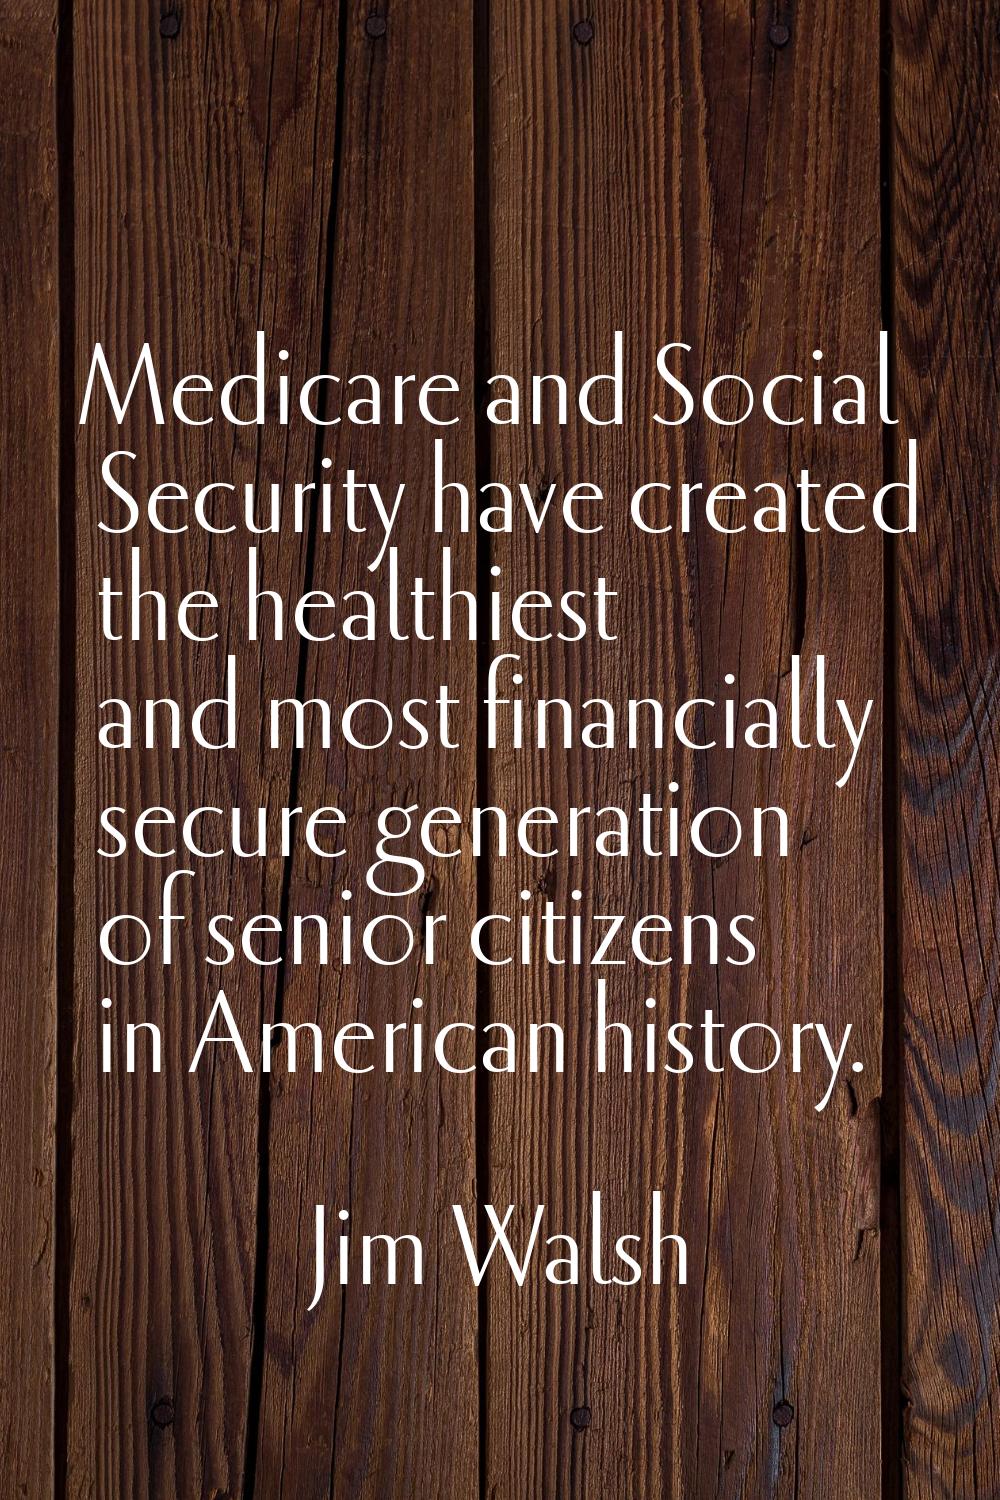 Medicare and Social Security have created the healthiest and most financially secure generation of 